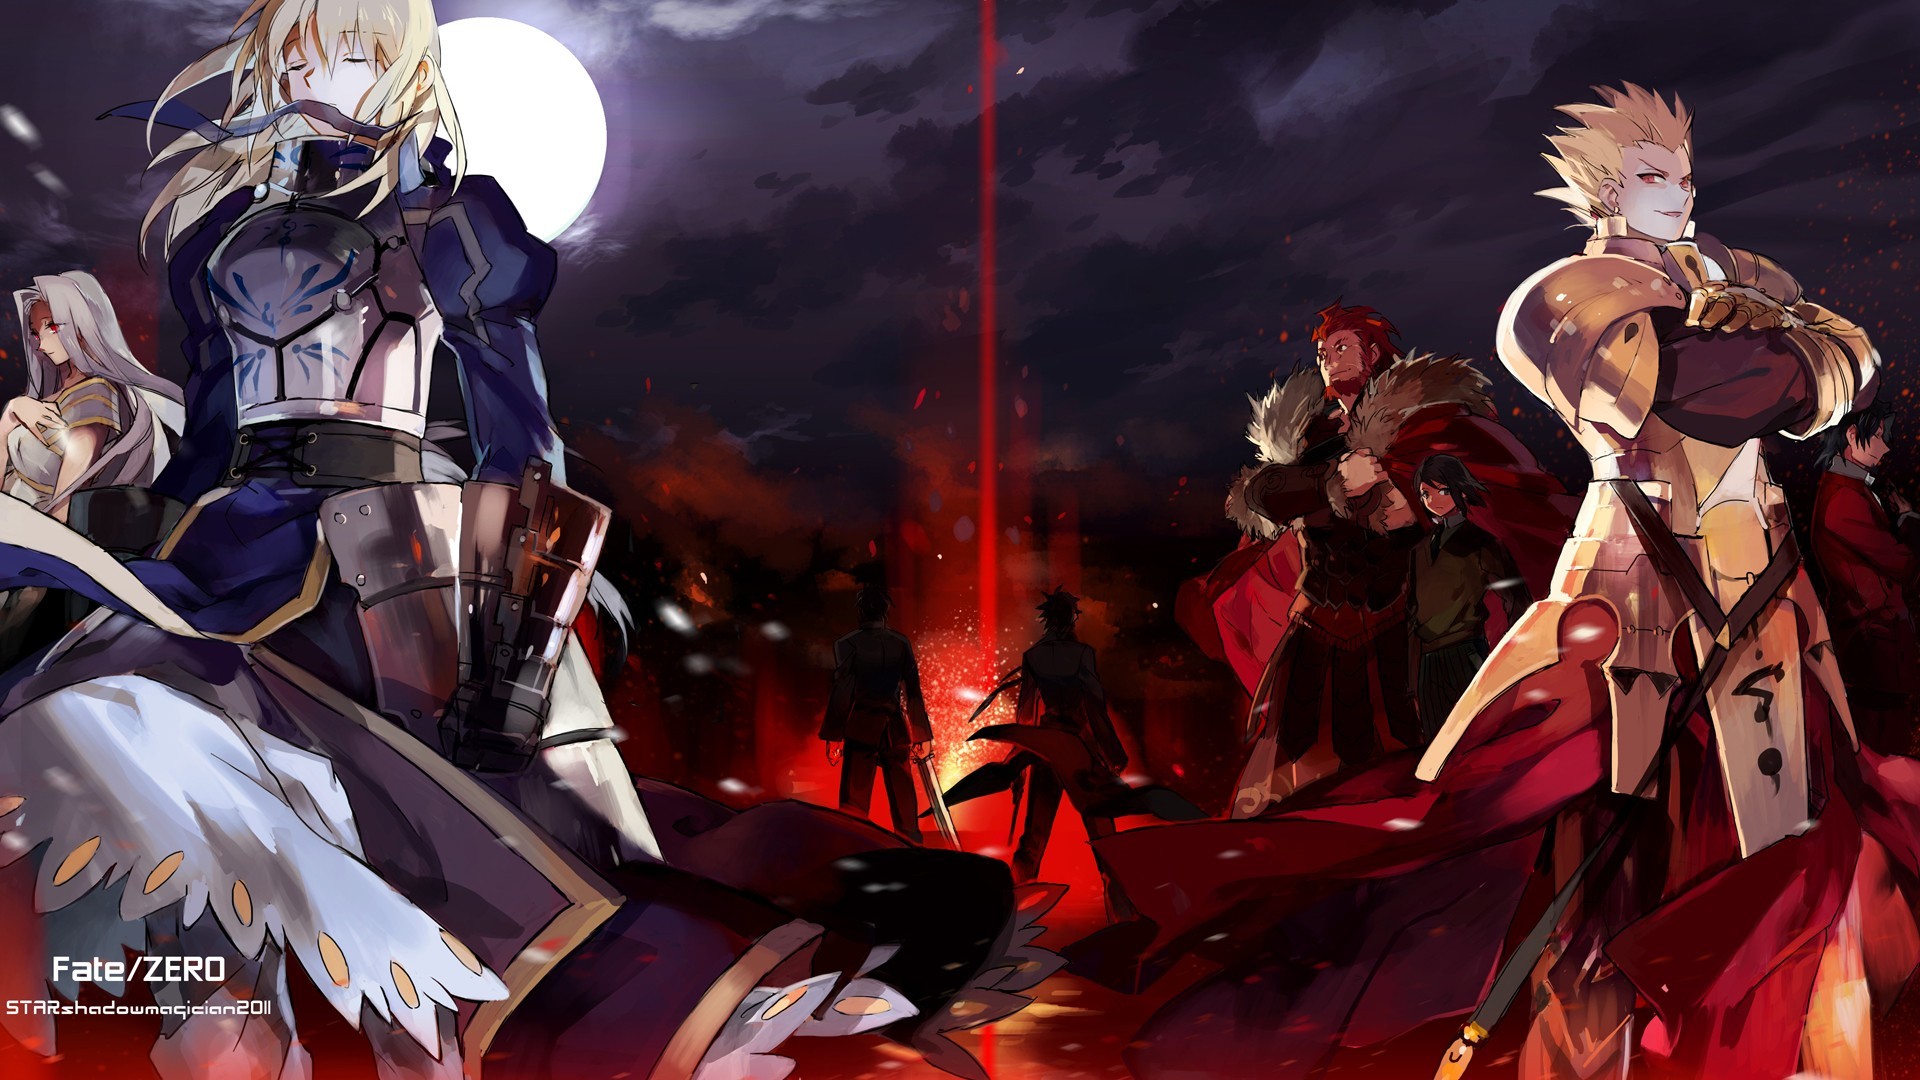 1920x1080 images Fate Stay Night HD wallpaper and background photos (32290756 .